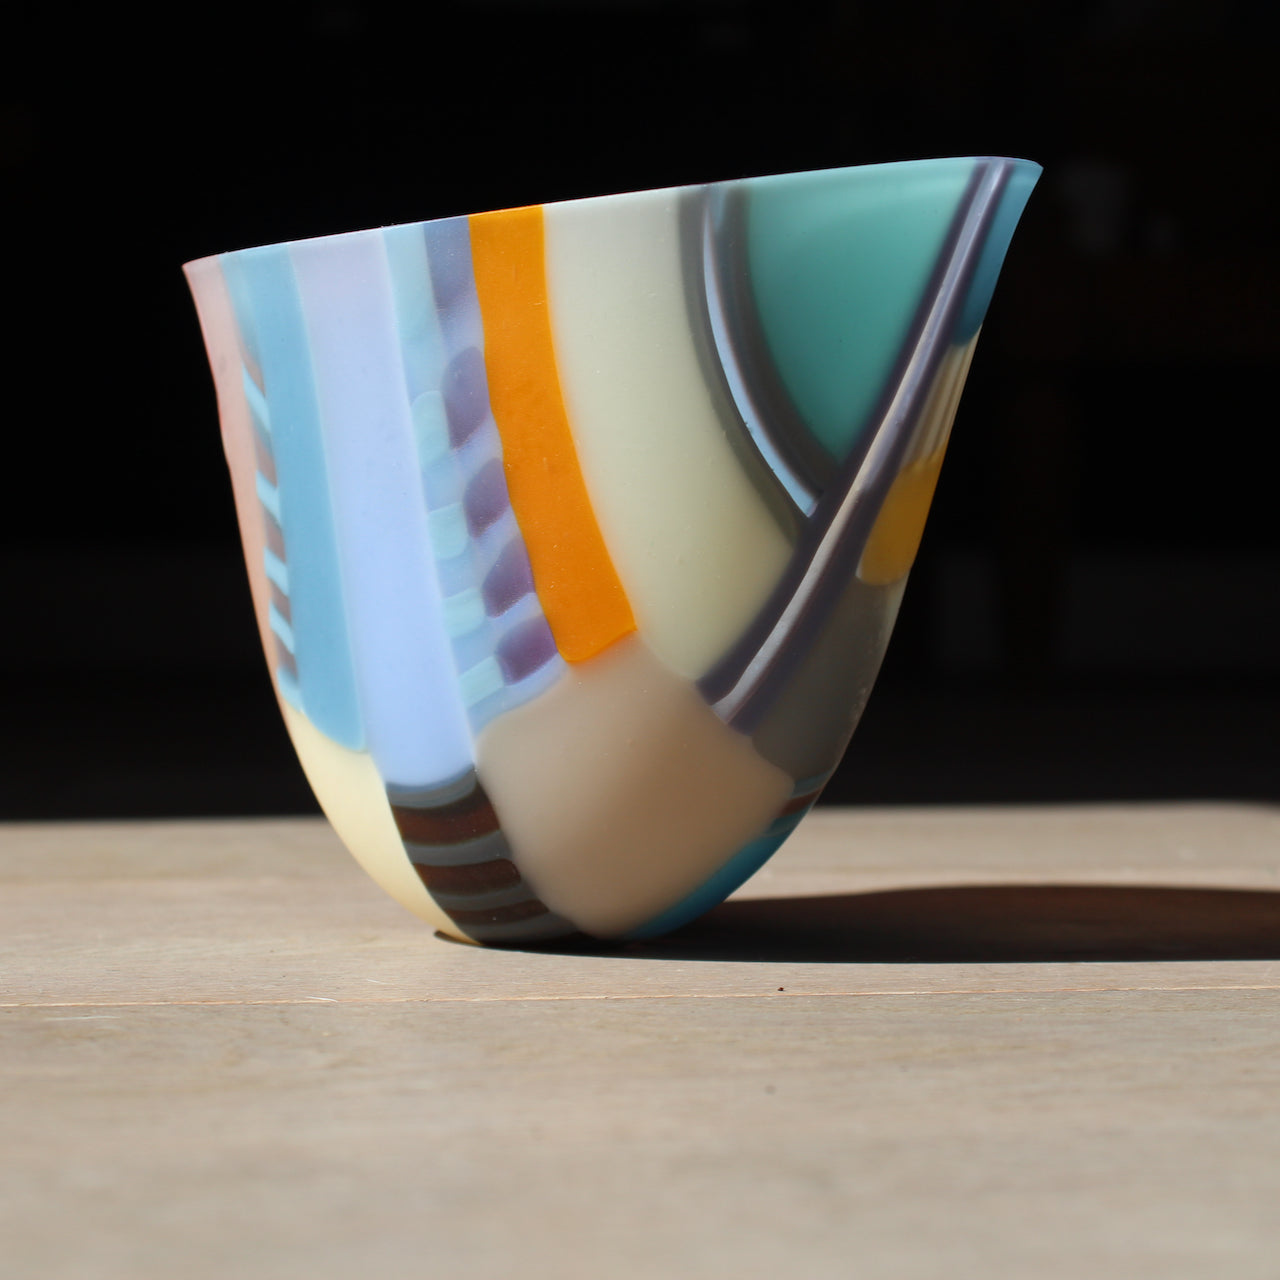 Round shaped bowl in vibrant tones of blue, orange, grey, pink by glass artist Ruth Shelley